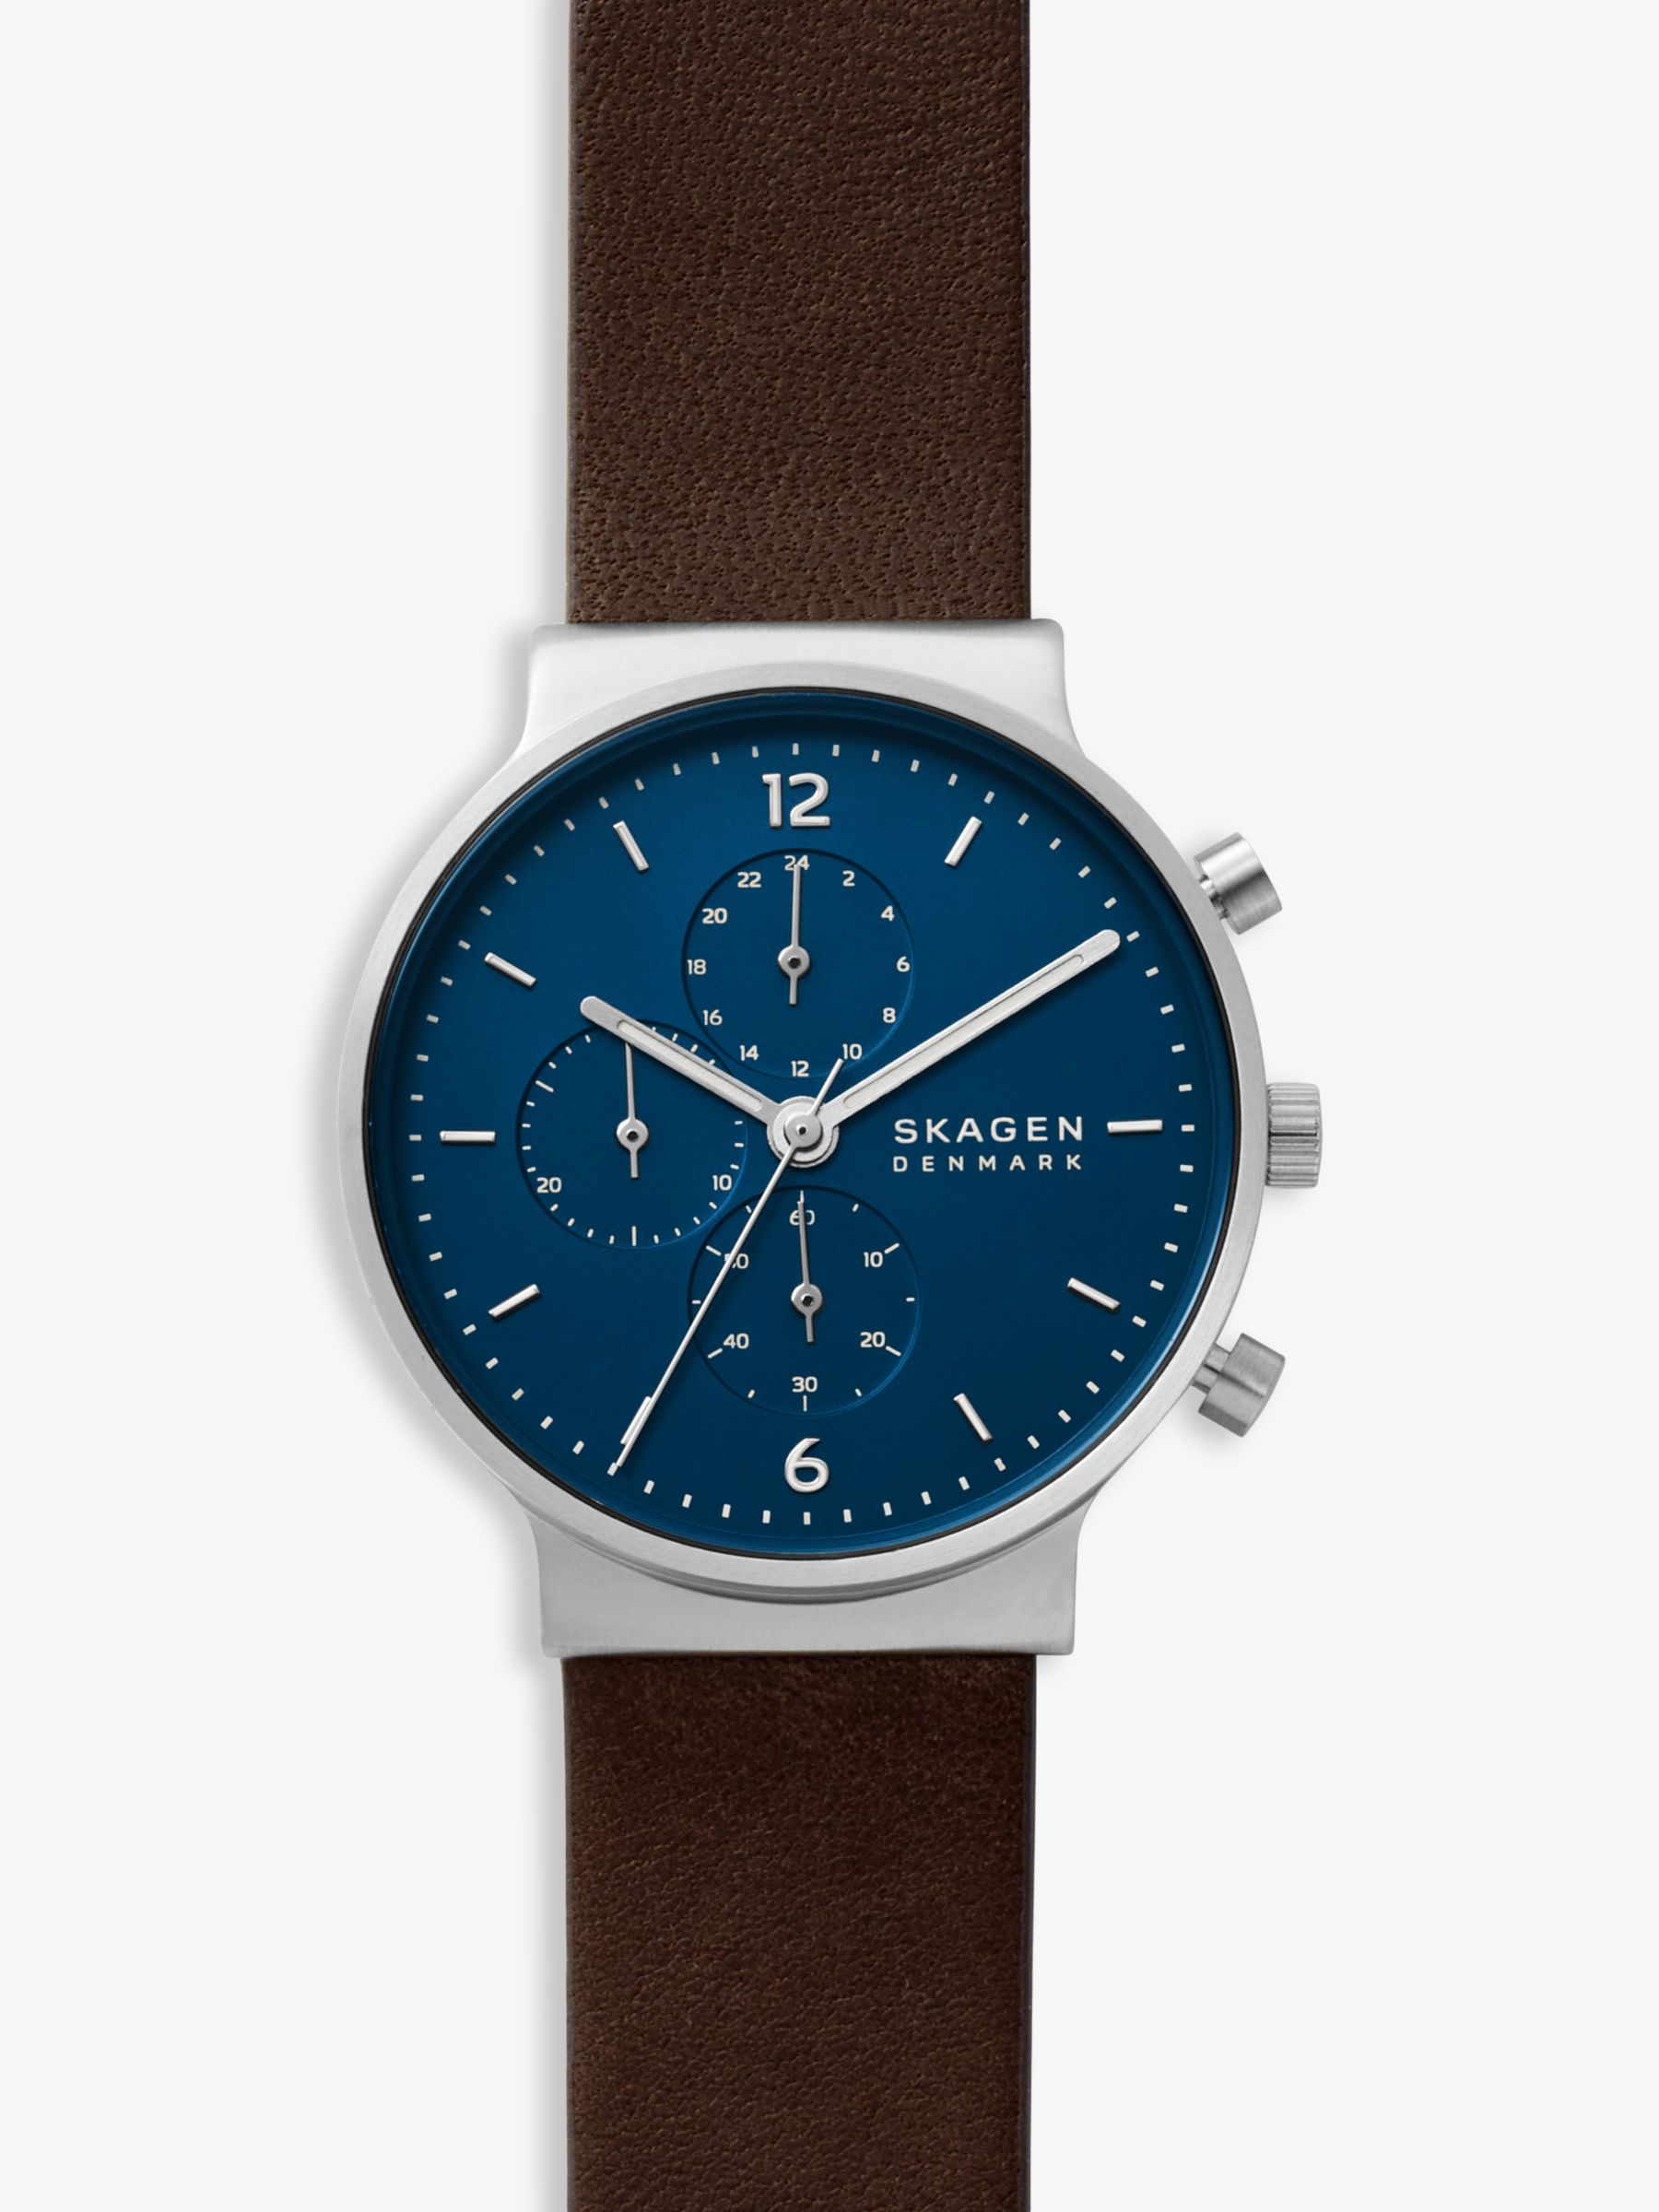 Skagen SKW6765 Men's Ancher Chronograph Leather Watch, Brown/Blue at Lewis & Partners